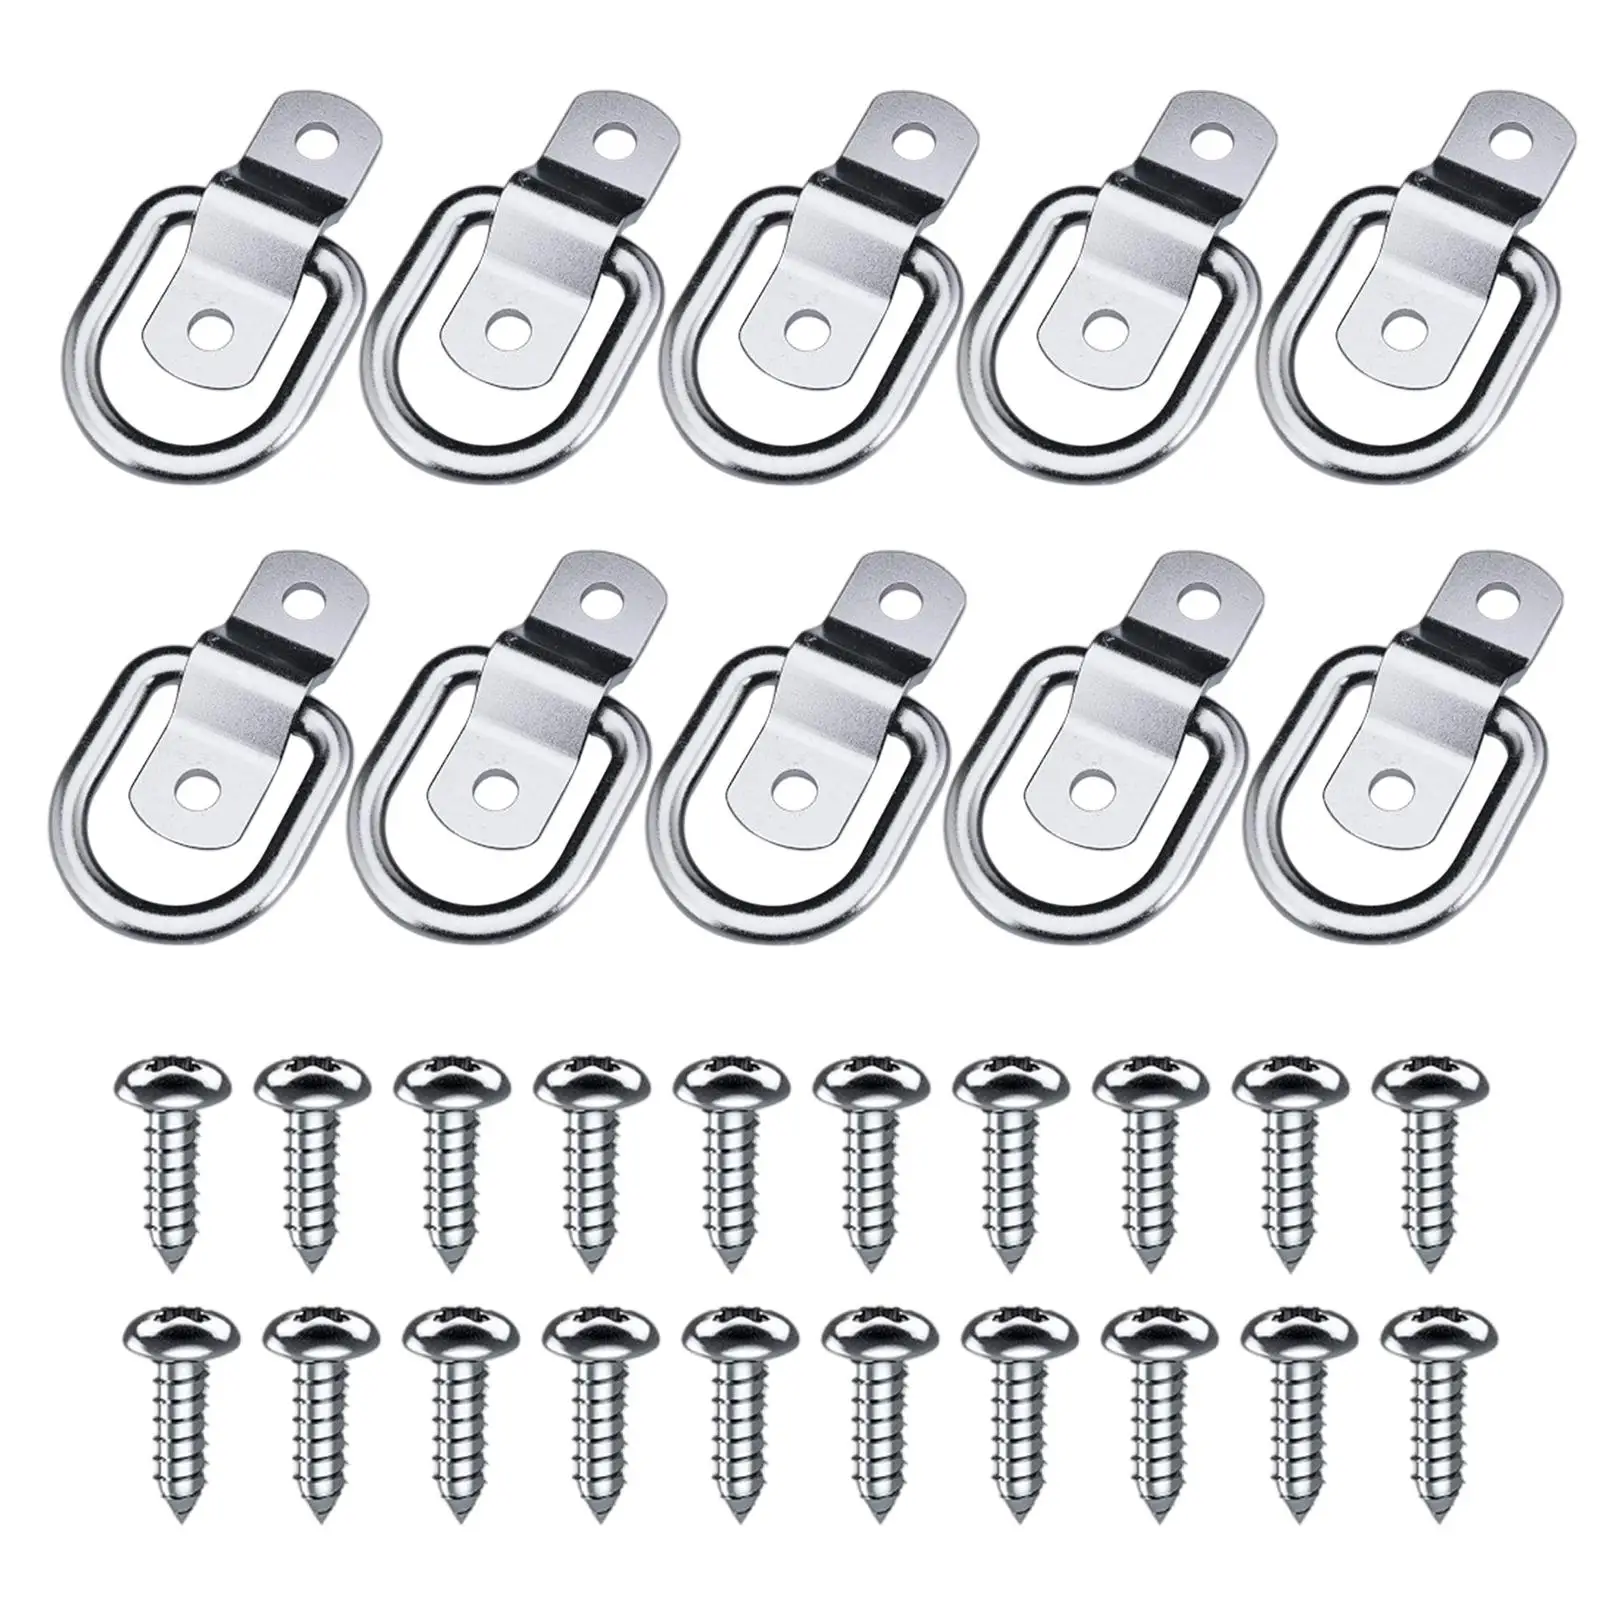 10x Stainless Steel D Rings with Screws Surface Mounting Lashing Rings Trailer Anchors Tie Downs for RV Trucks Boats Canoe ATV